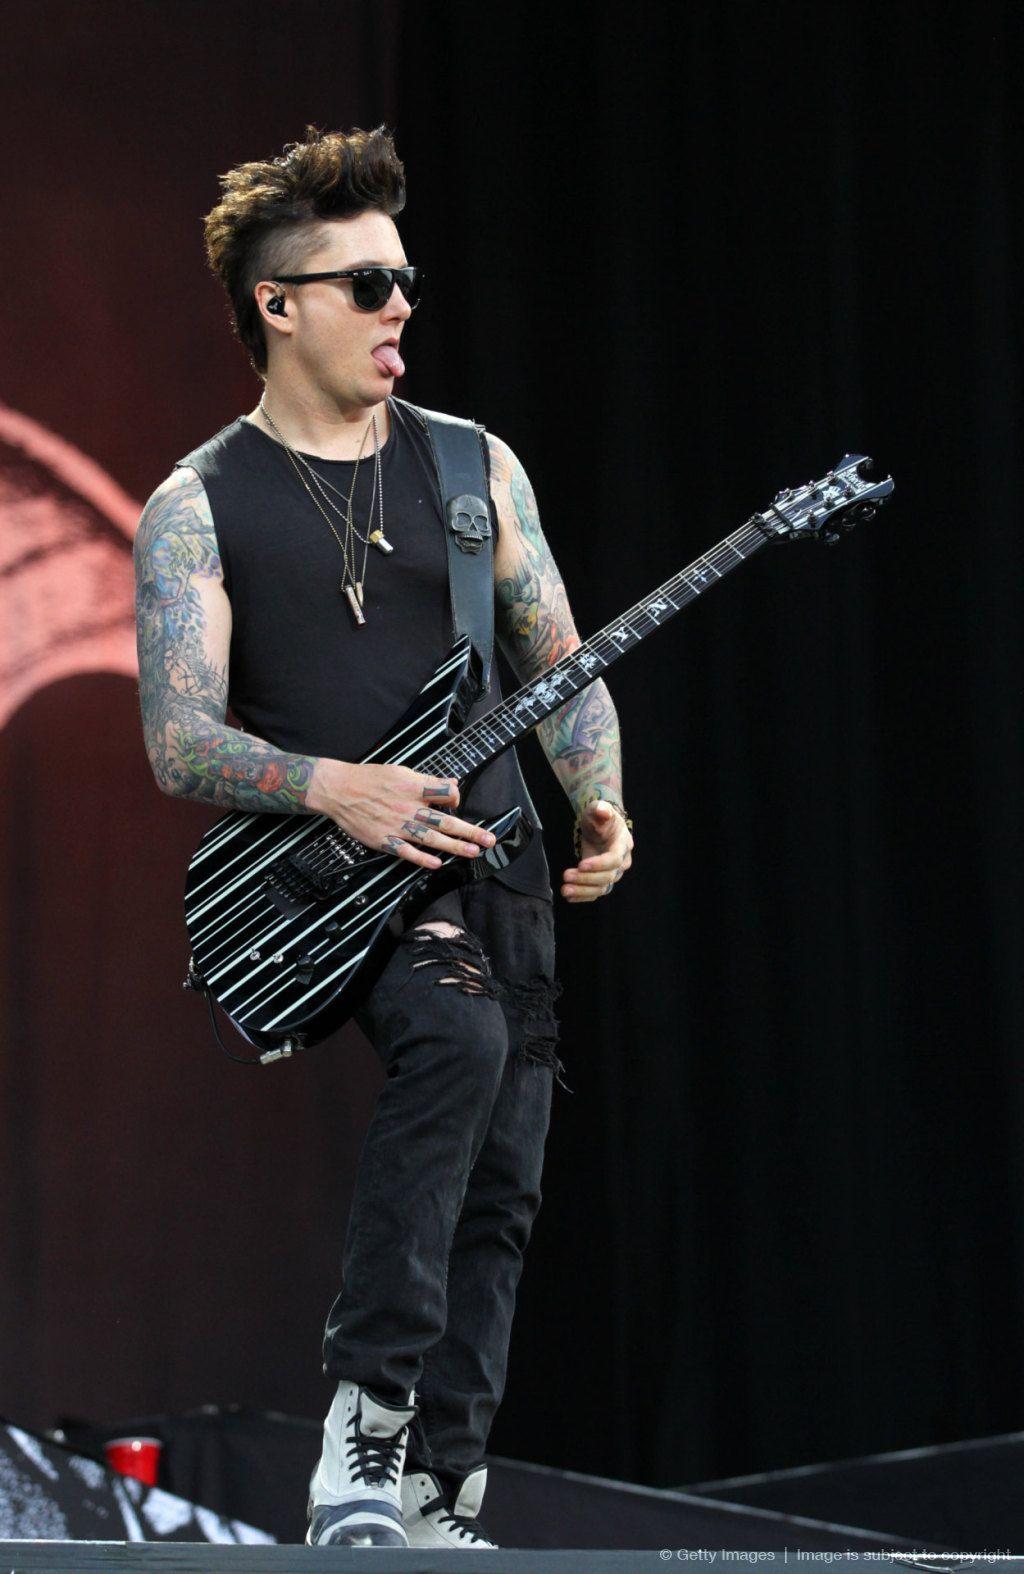 Synyster Gates. Bands!. Synyster gates, Gates